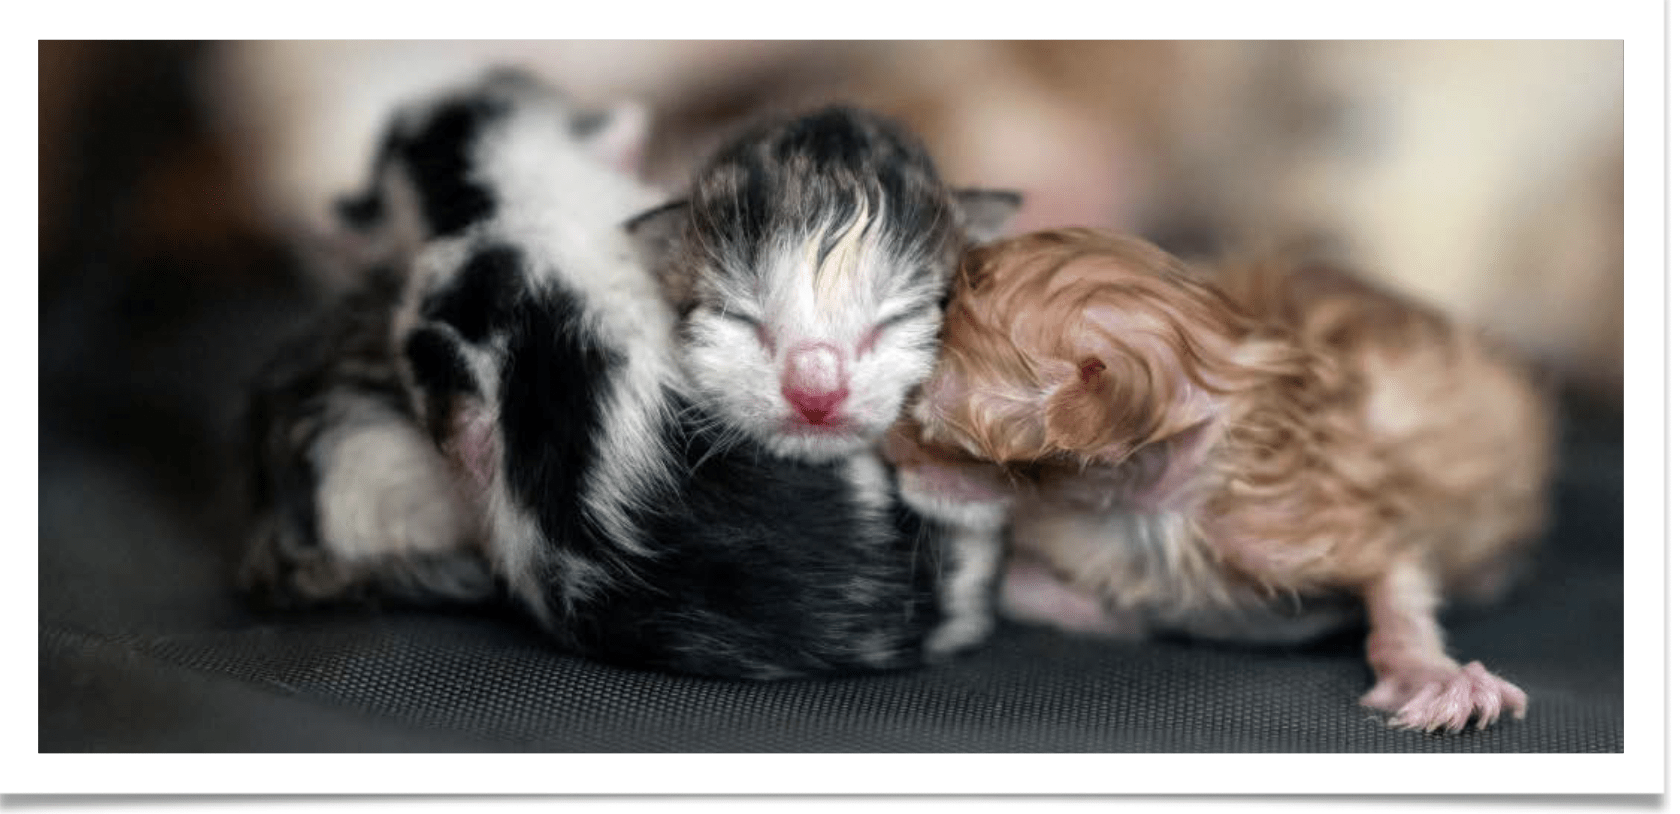 Newborn kittens safely born into foster care with Beautiful Together 